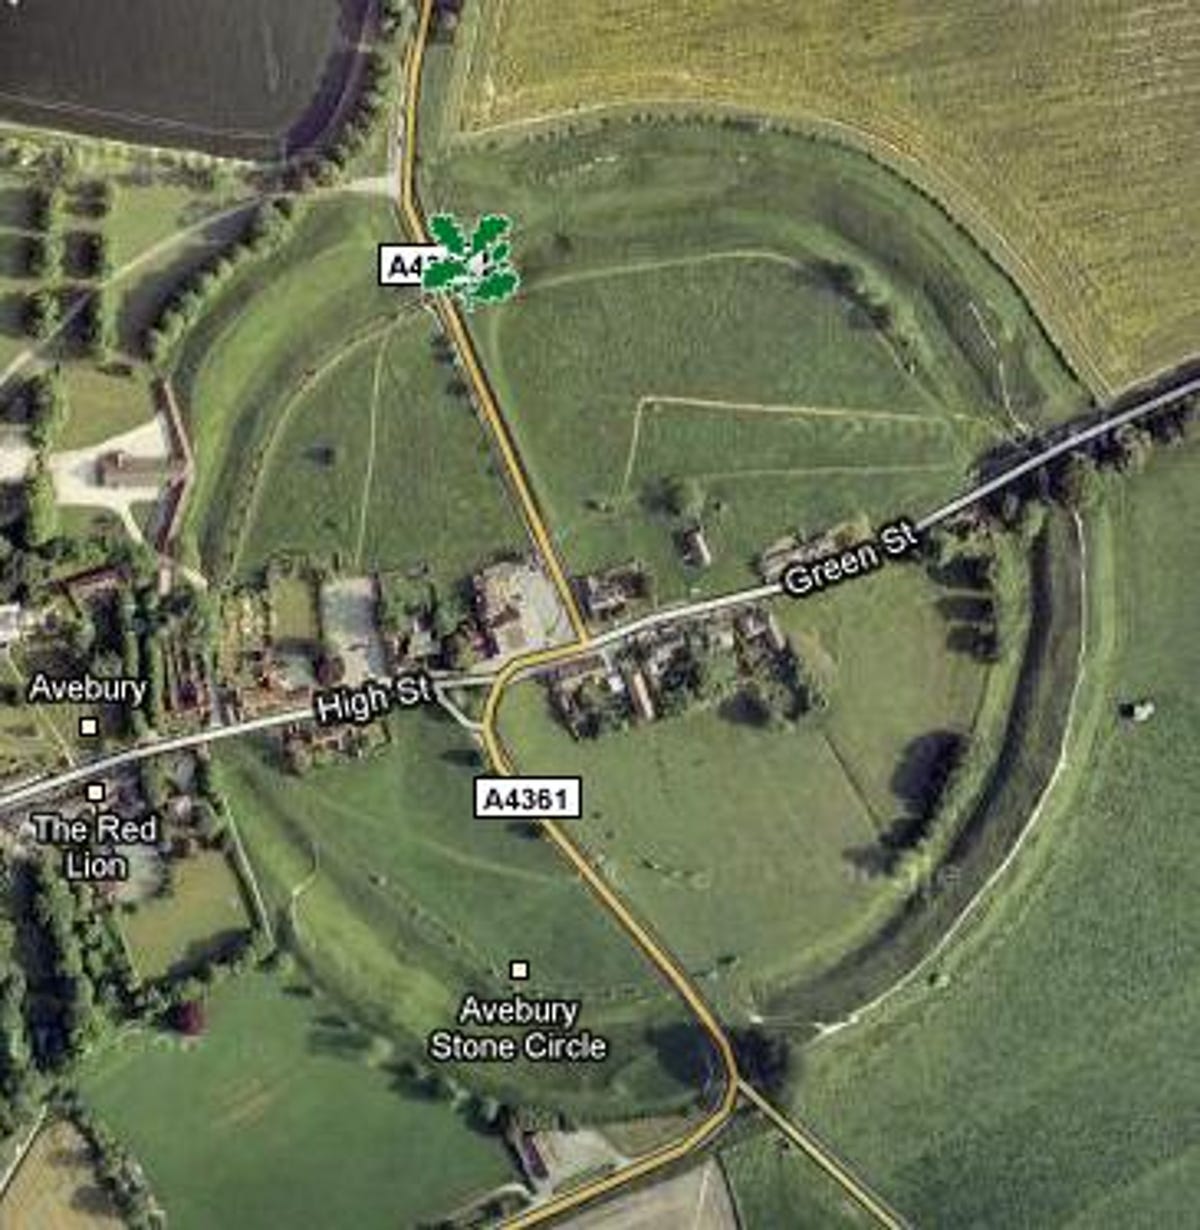 Avebury's ancient stone circle on Google Maps. You can tour the circle on Street View, complete with sheep dotting the landscape.